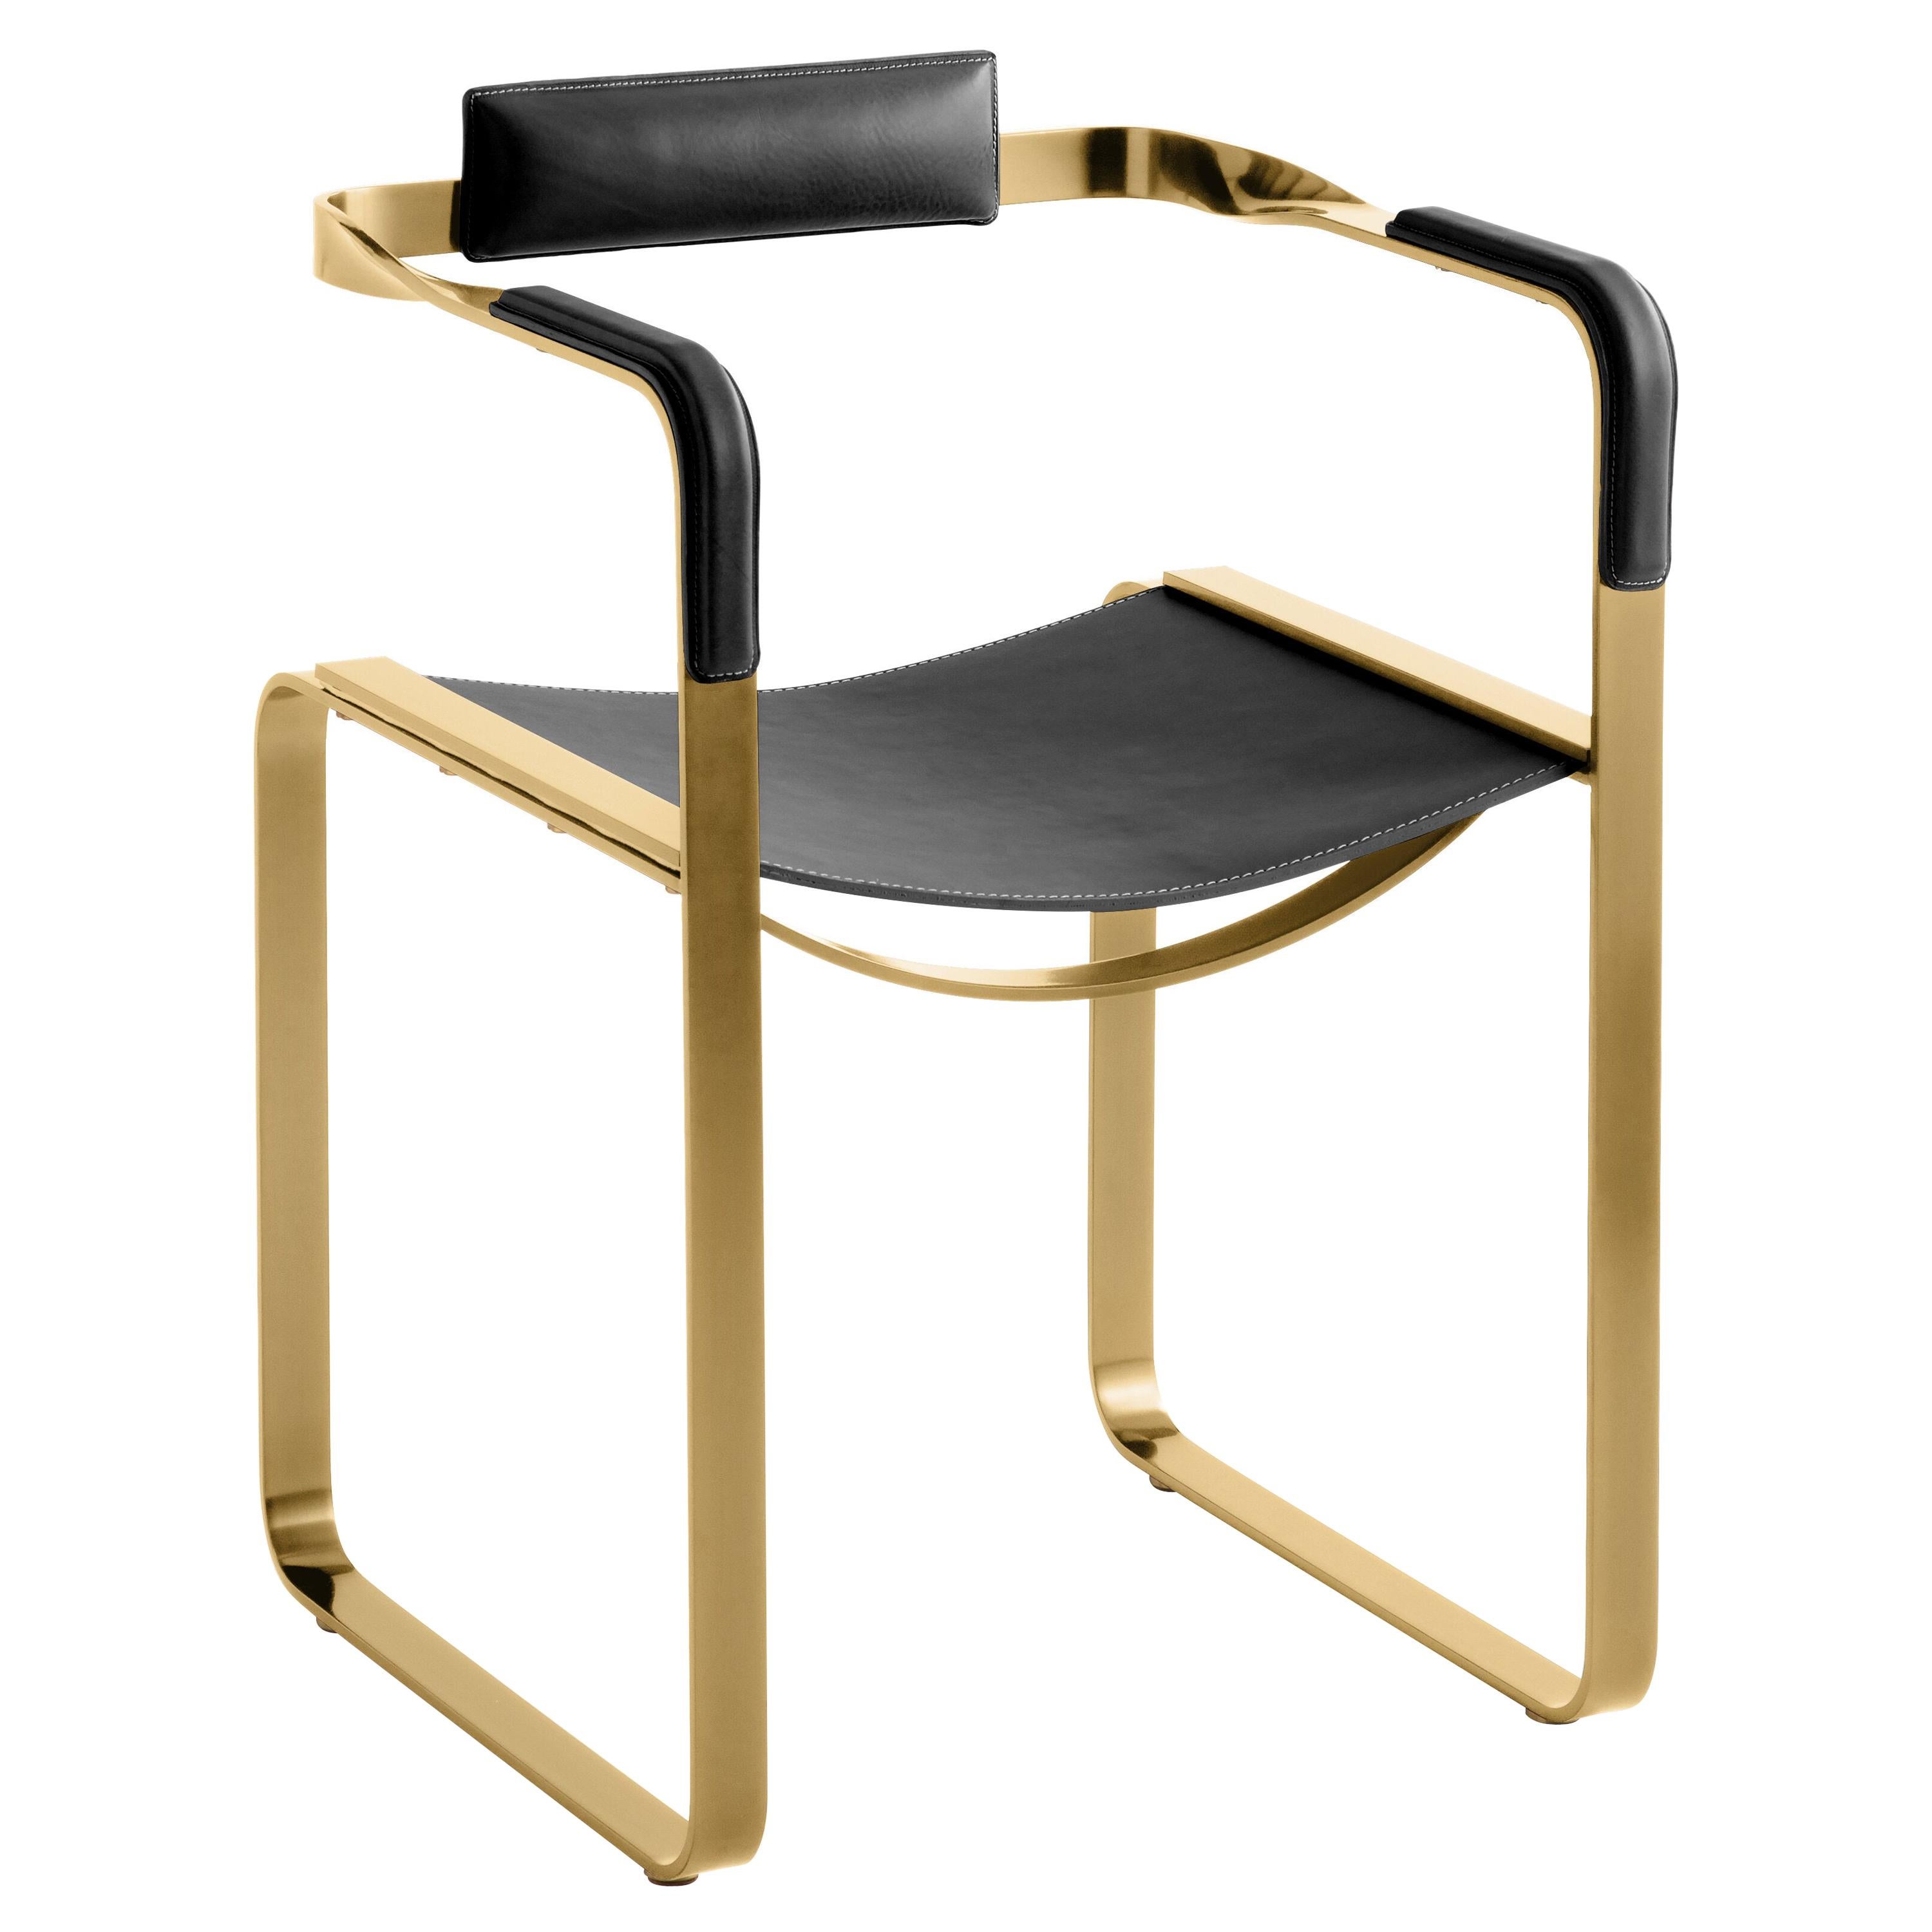 Armchair, Aged Brass Steel and Black Saddle Leather, Contemporary Style For Sale